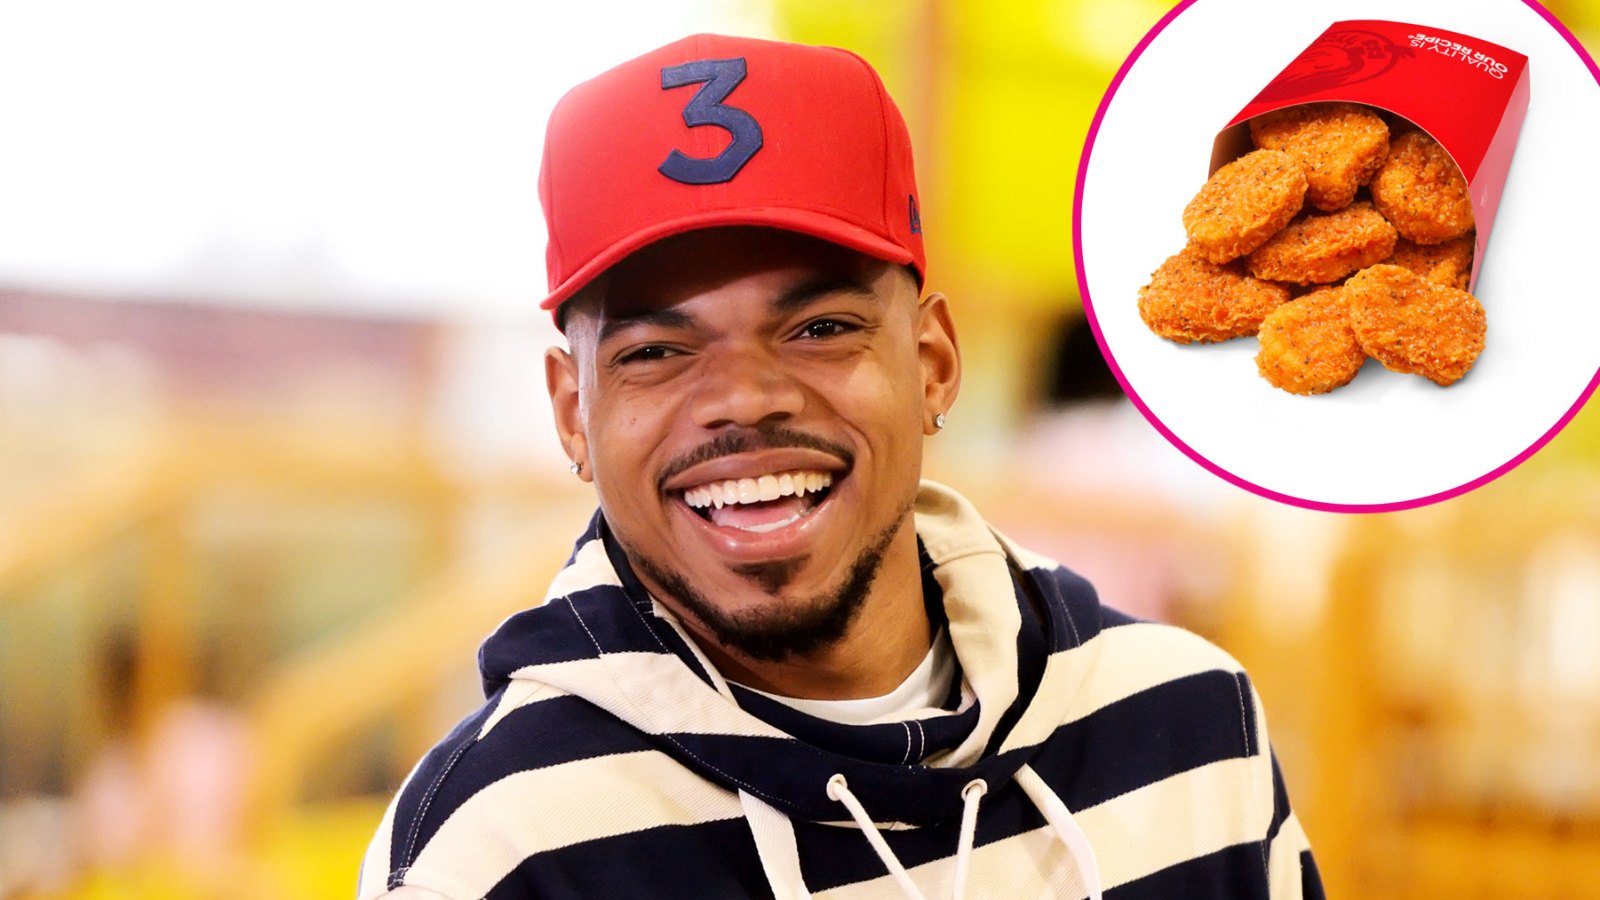 Wendy's Is Bringing Back Spicy Chicken Nuggets Thanks to Chance the Rapper: ’This Is Not a Drill’